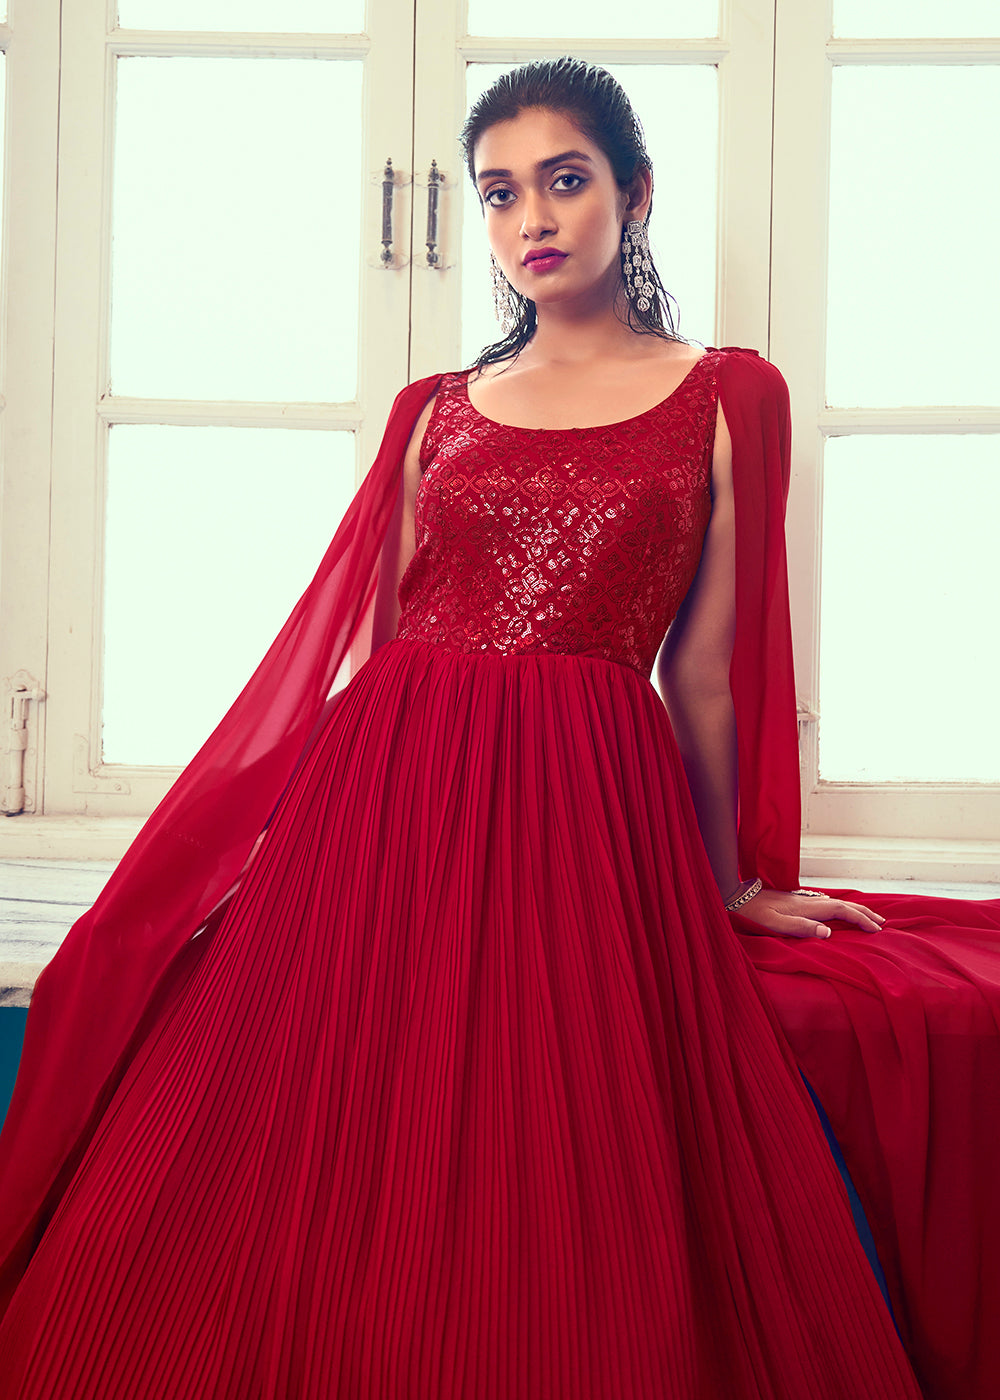 Buy Now Georgette Pretty Red Sequins & Thread Party Wear Gown Online in USA, UK, Australia, New Zealand, Canada & Worldwide at Empress Clothing.